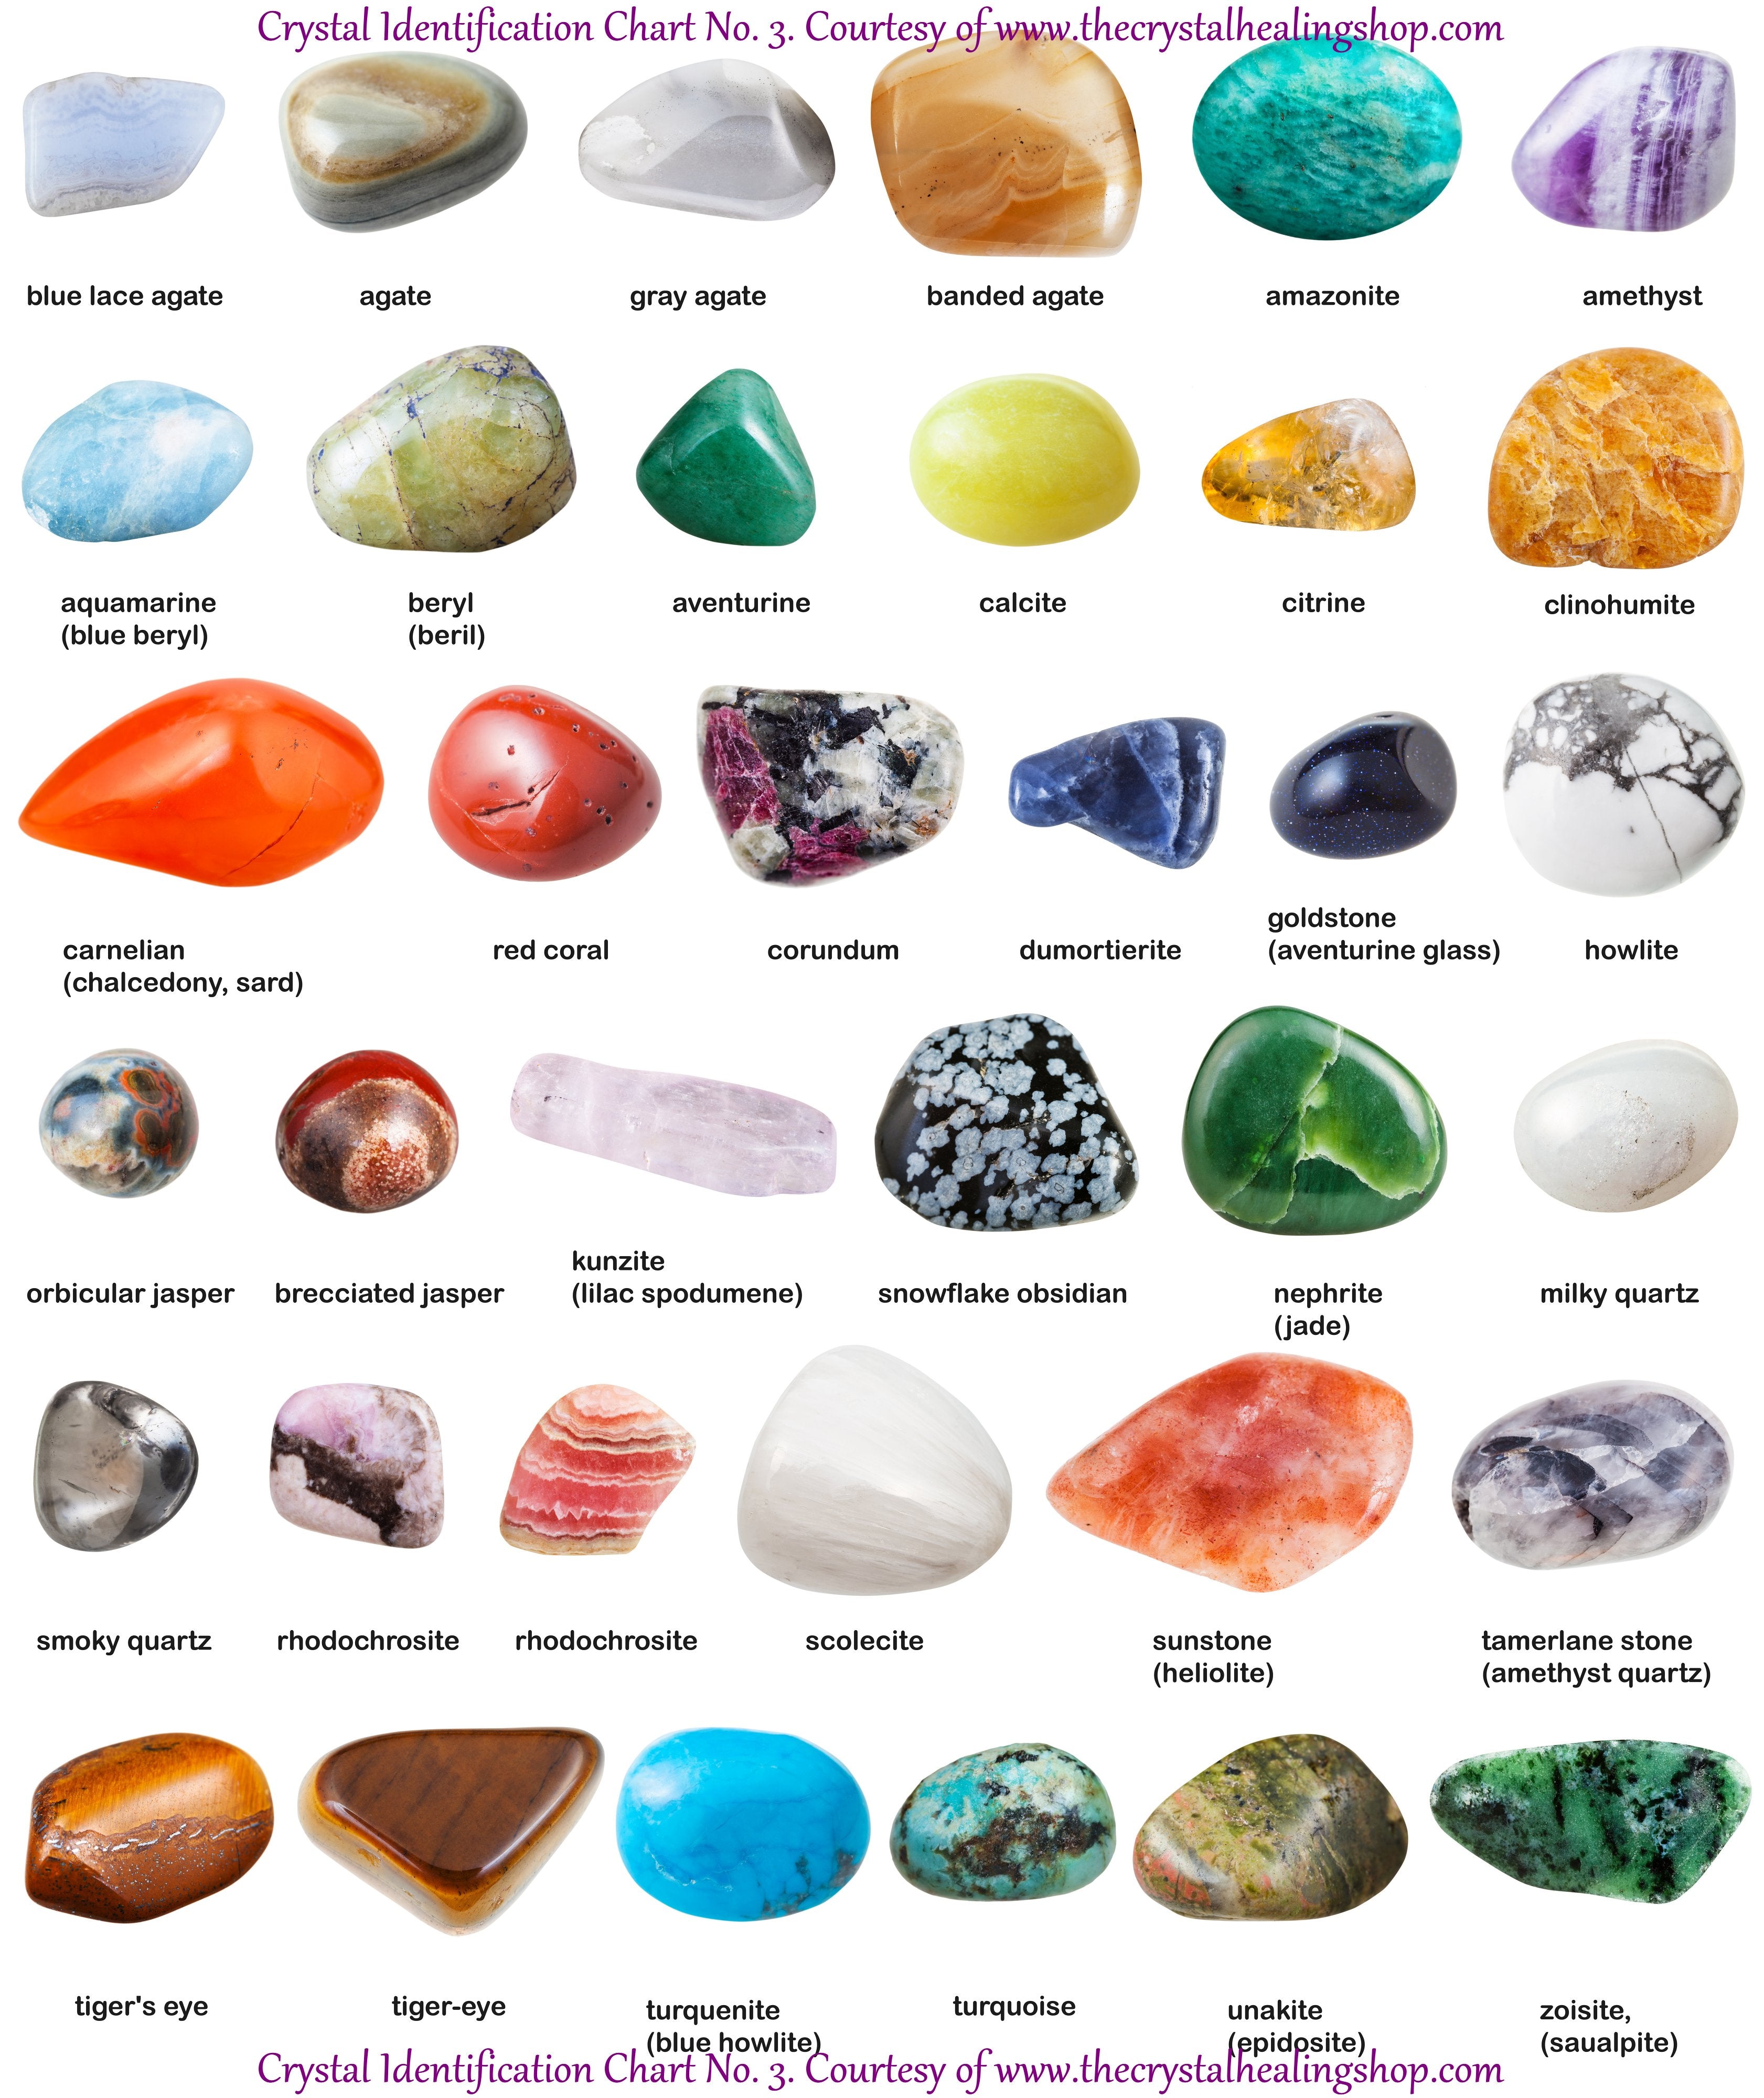 crystal-identification-chart-no-3-the-crystal-healing-shop